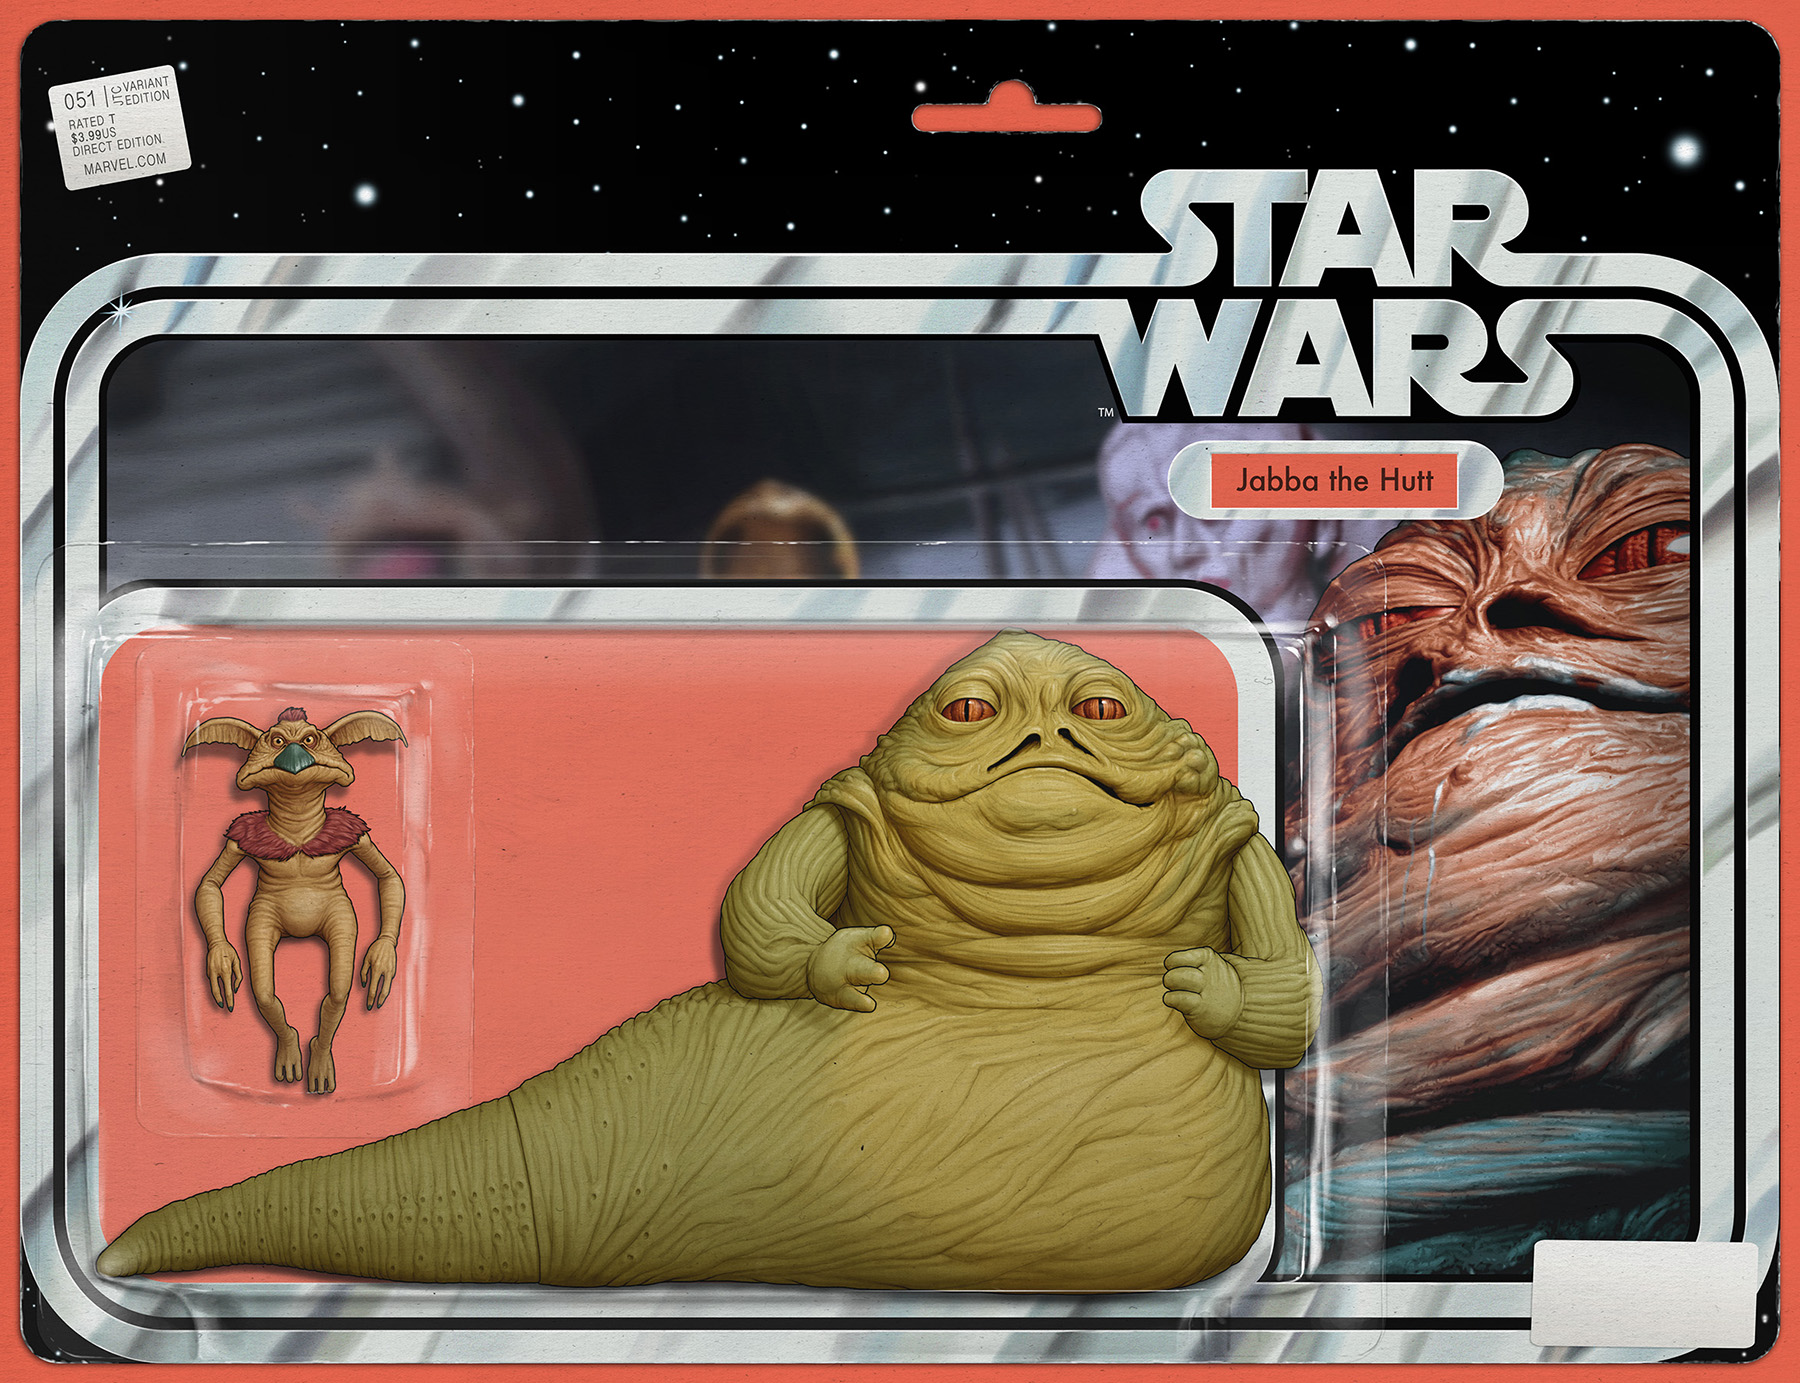 Star Wars #51 (JTC "Jabba the Hutt" Action Figure Variant Cover) (06.09.2018)